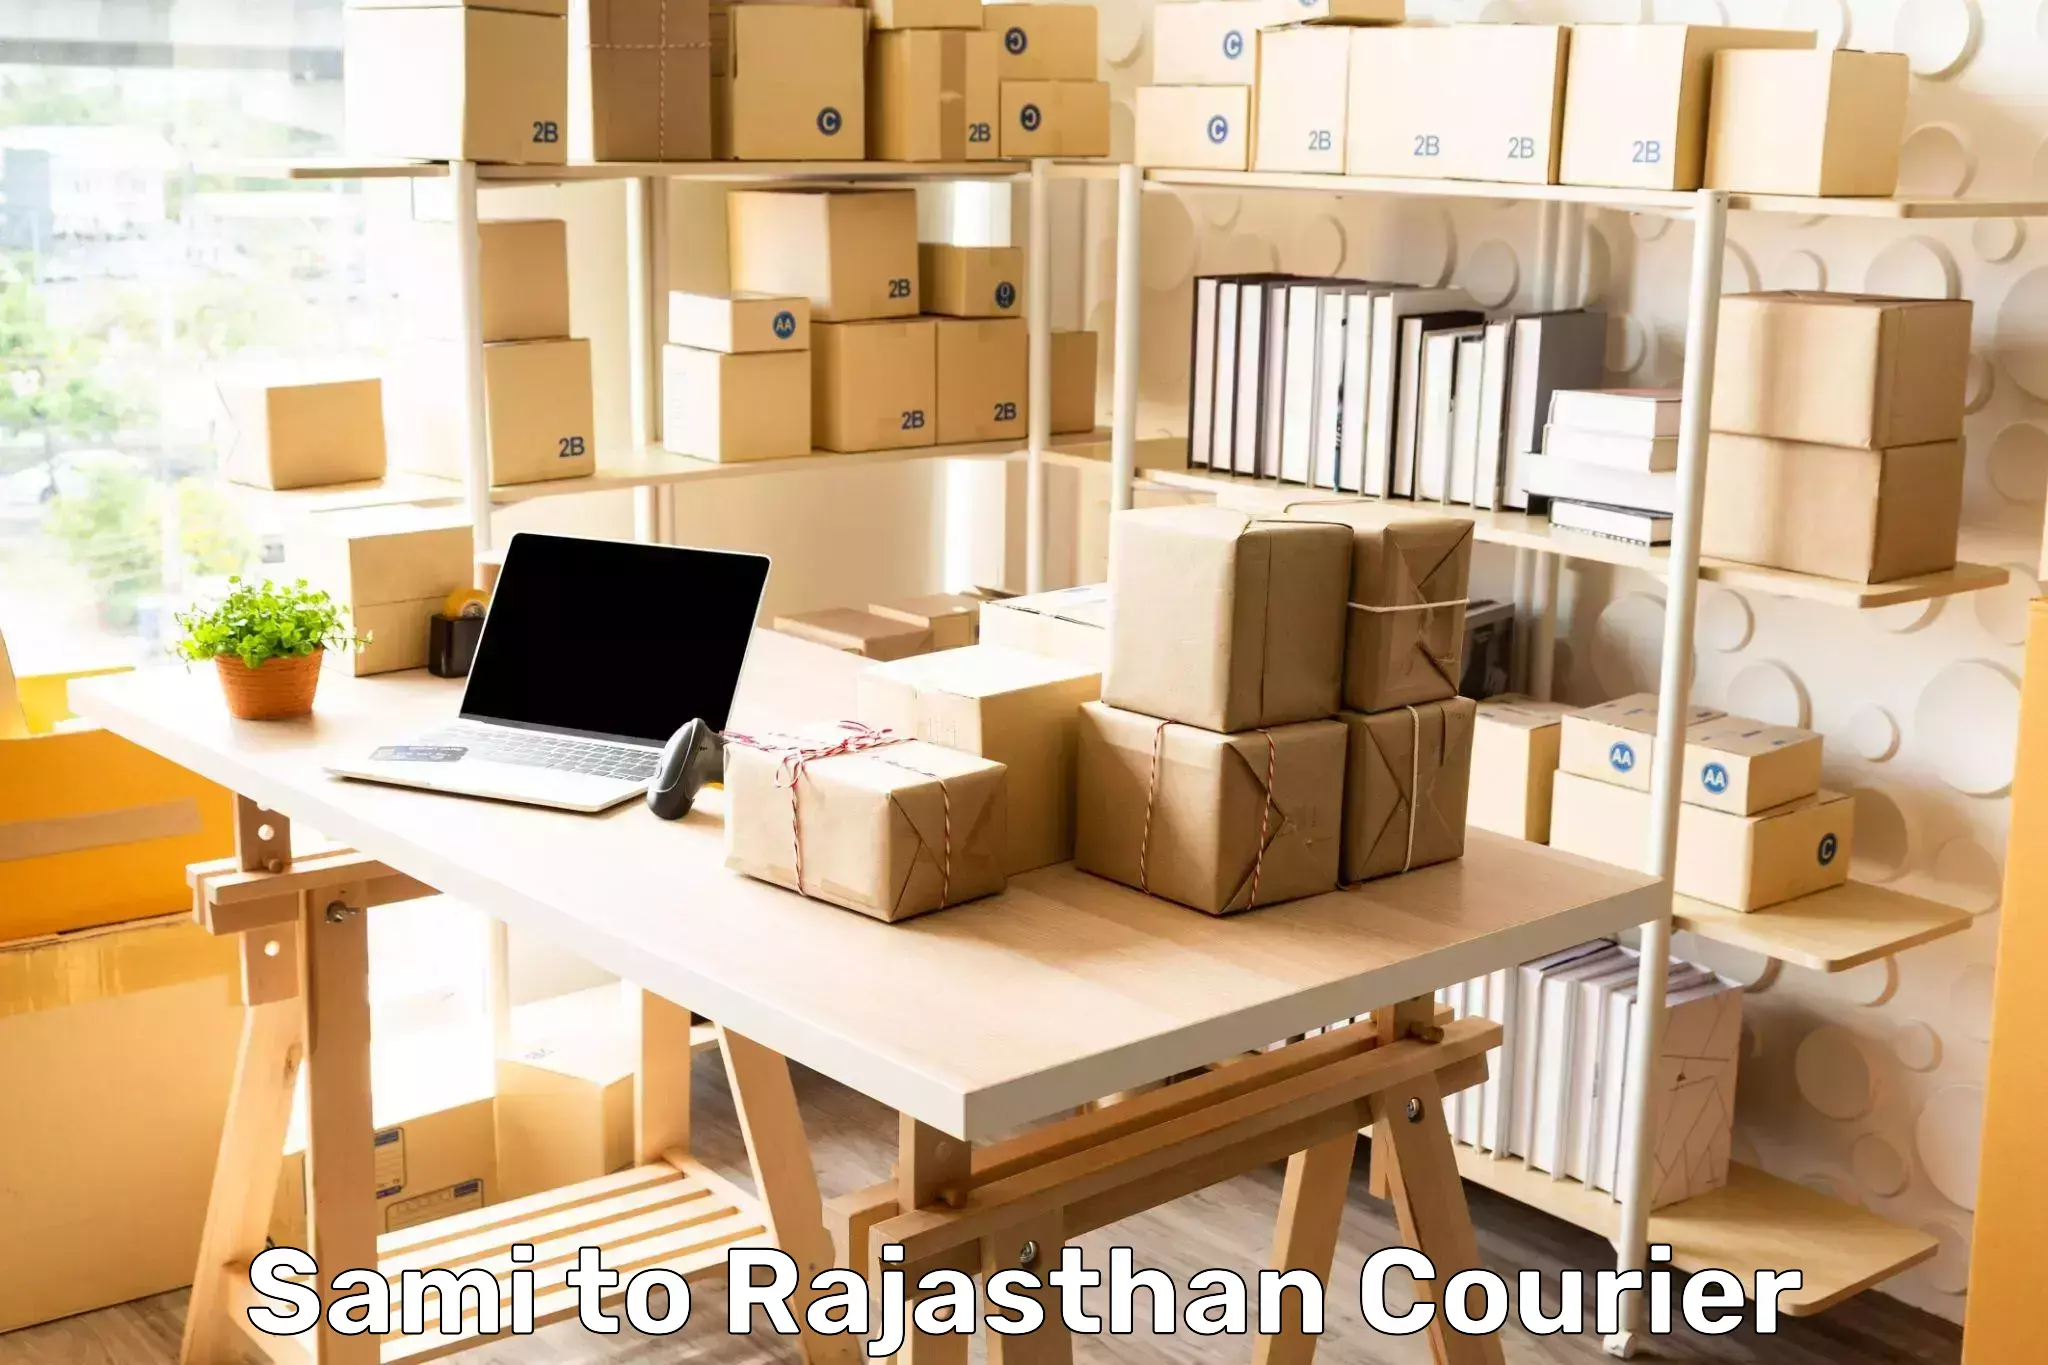 Local courier options Sami to Rajasthan